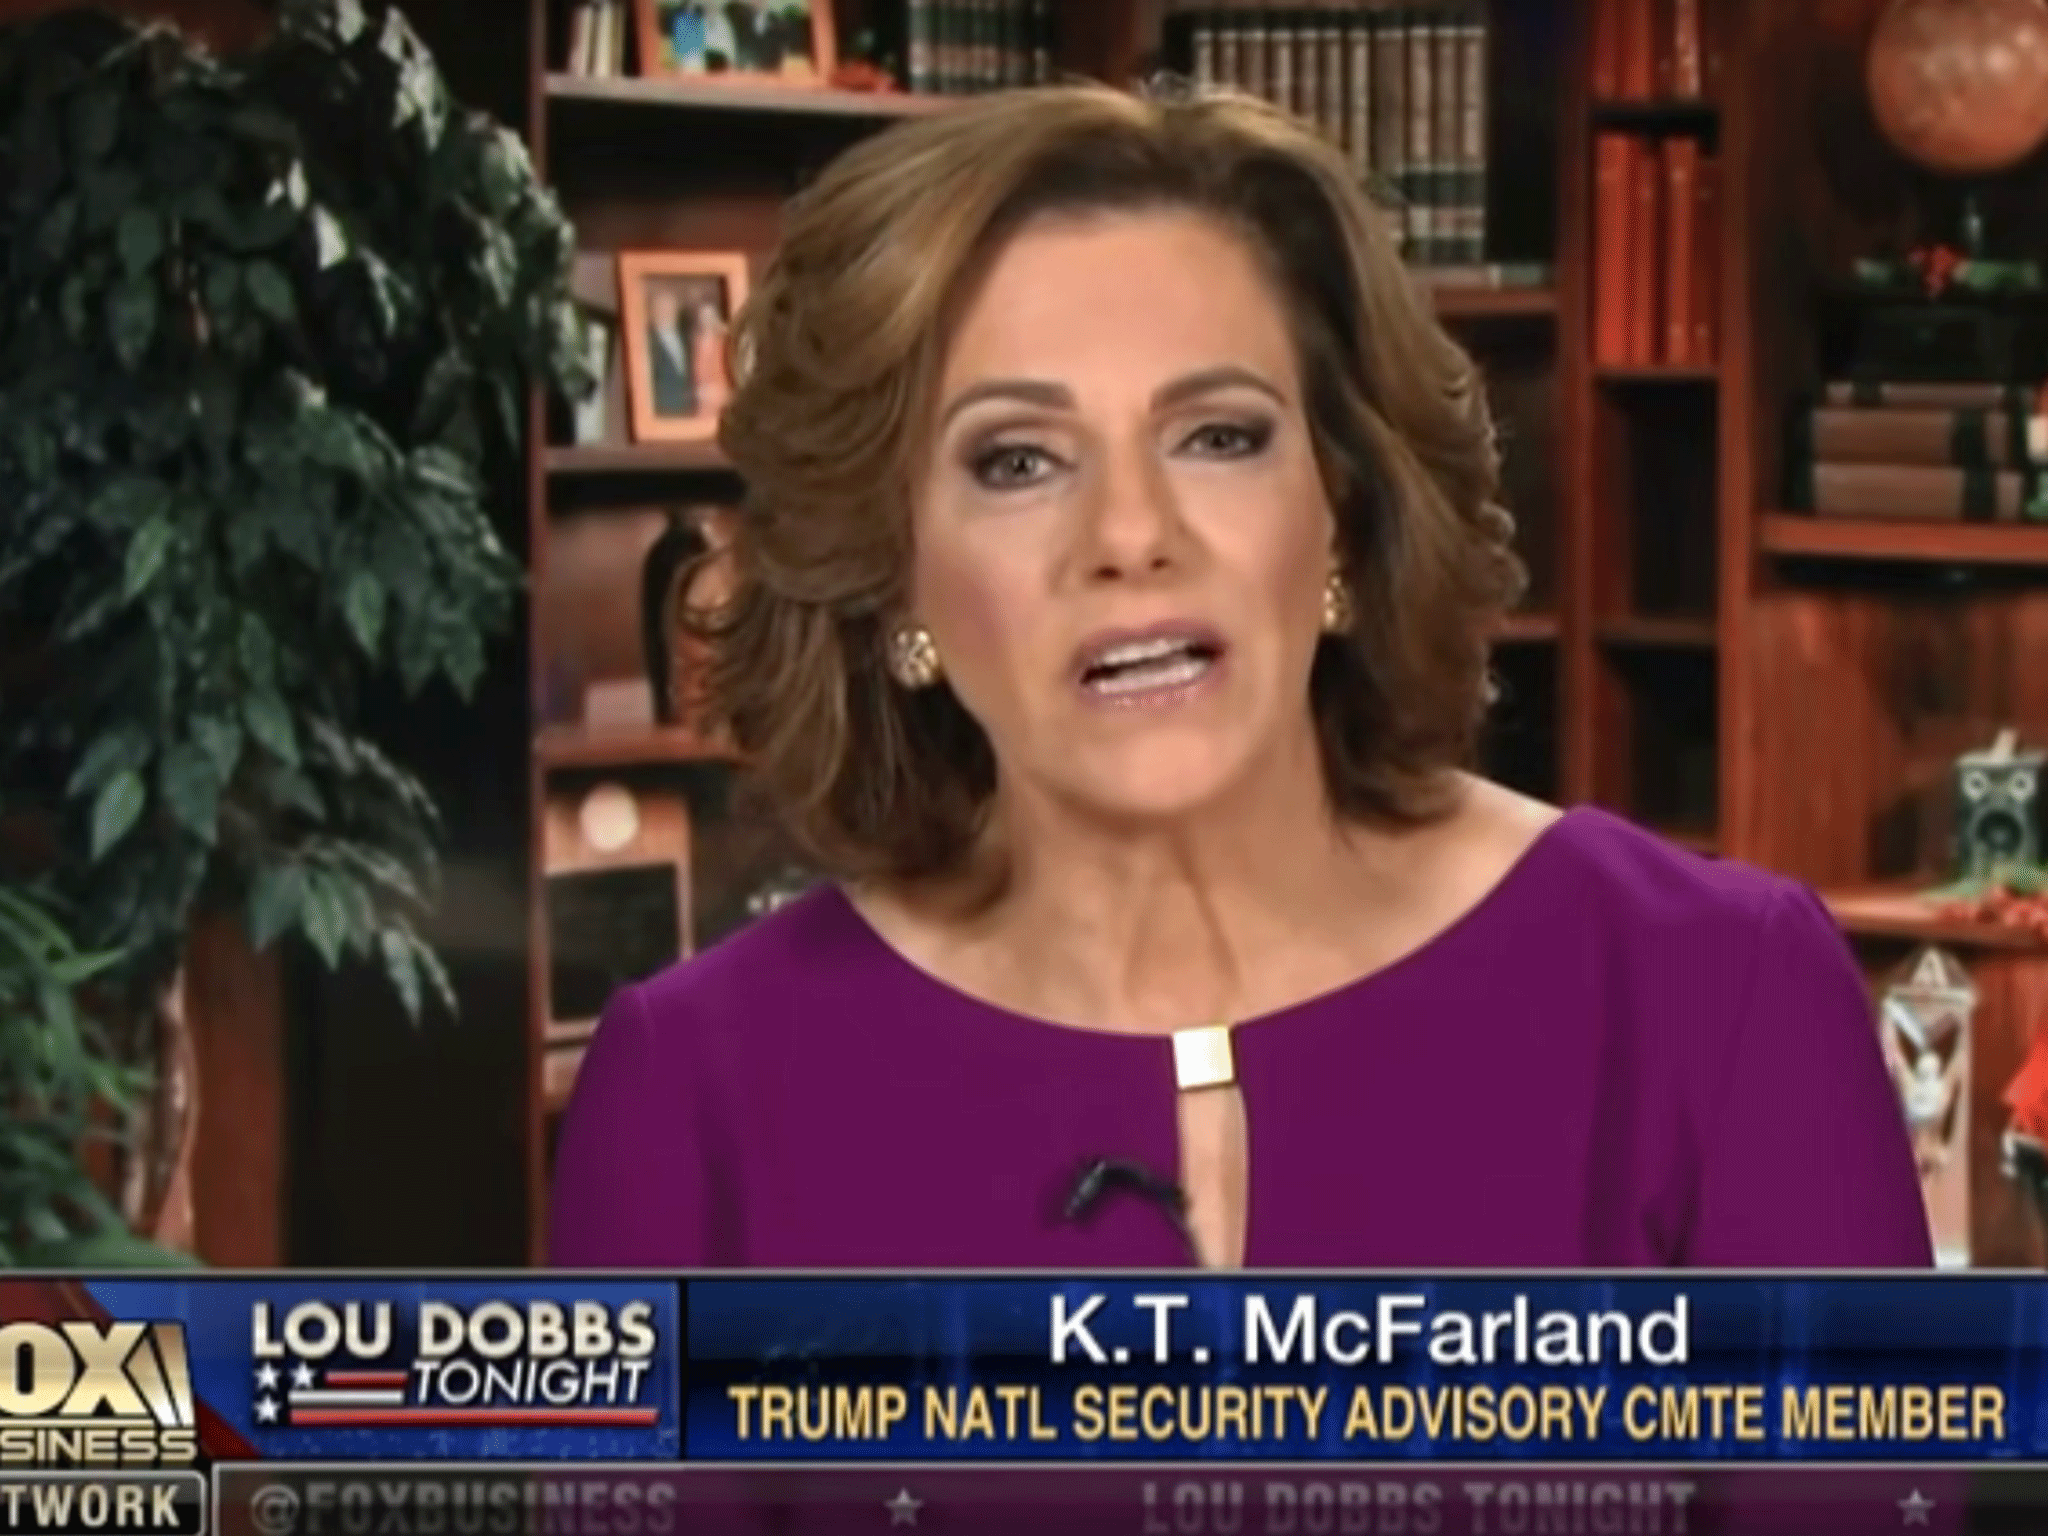 Ms McFarland’s strongest link to national security was talking about terrorism on Fox News